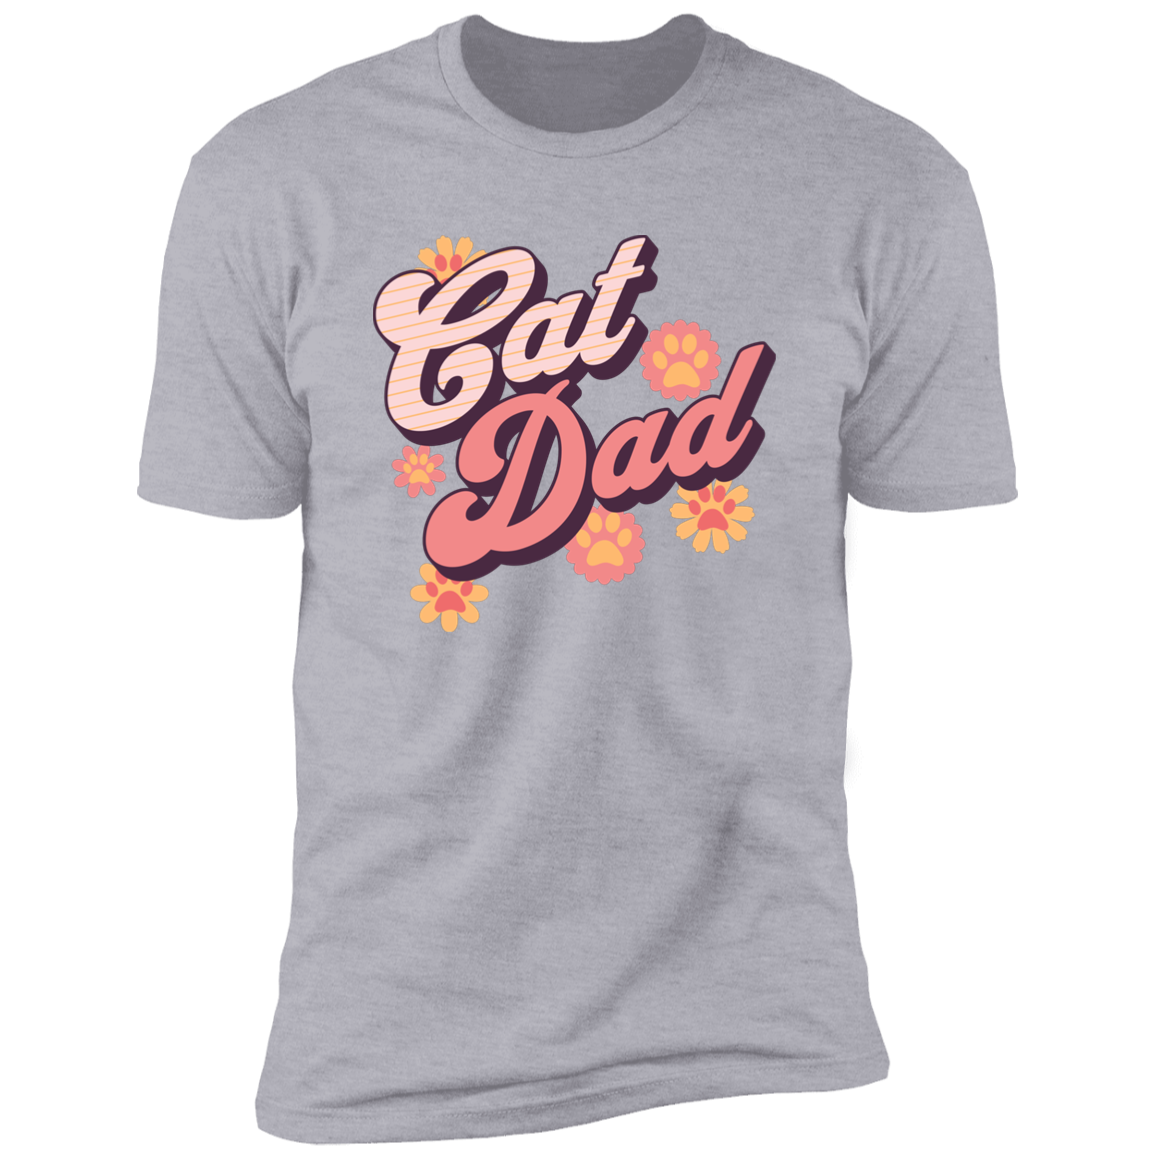 Cat Dad Retro T-shirt, Cat Dad Shirt for humans, in light heather gray